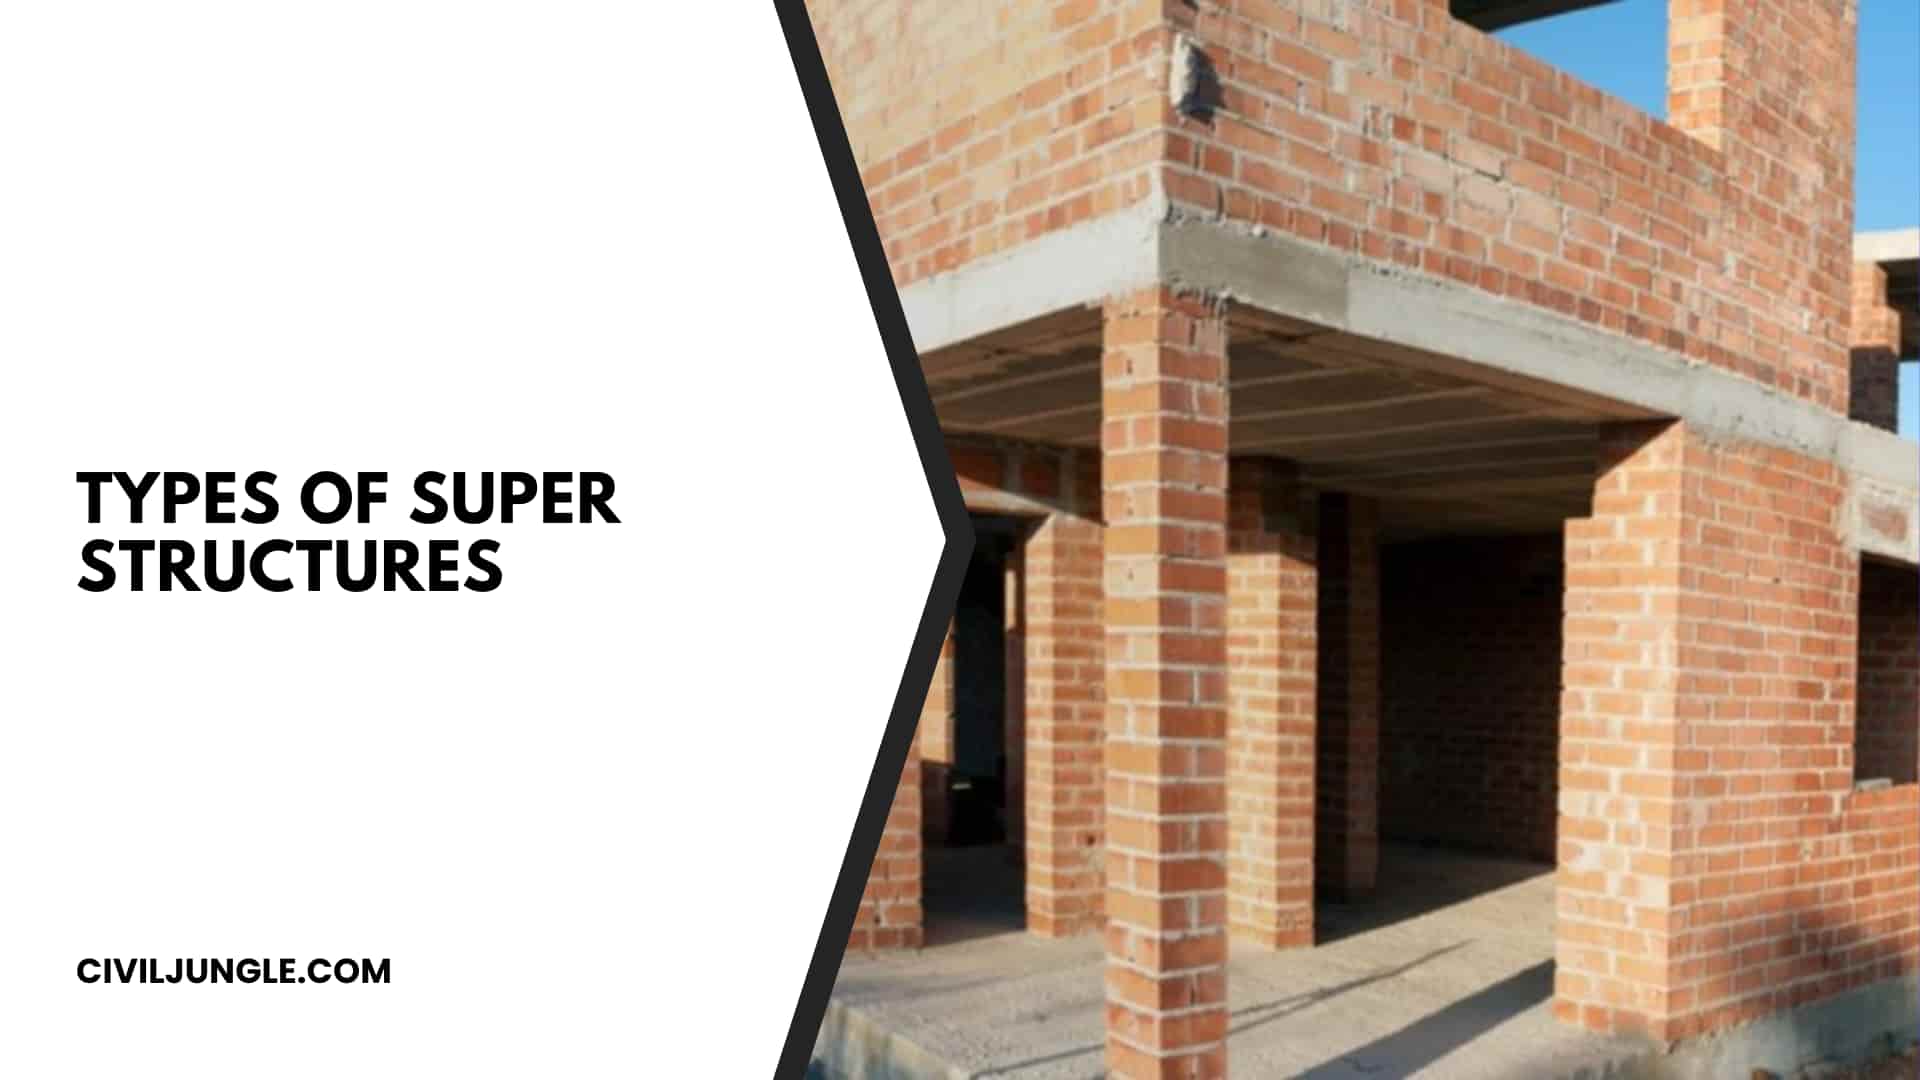 Types of Super Structures